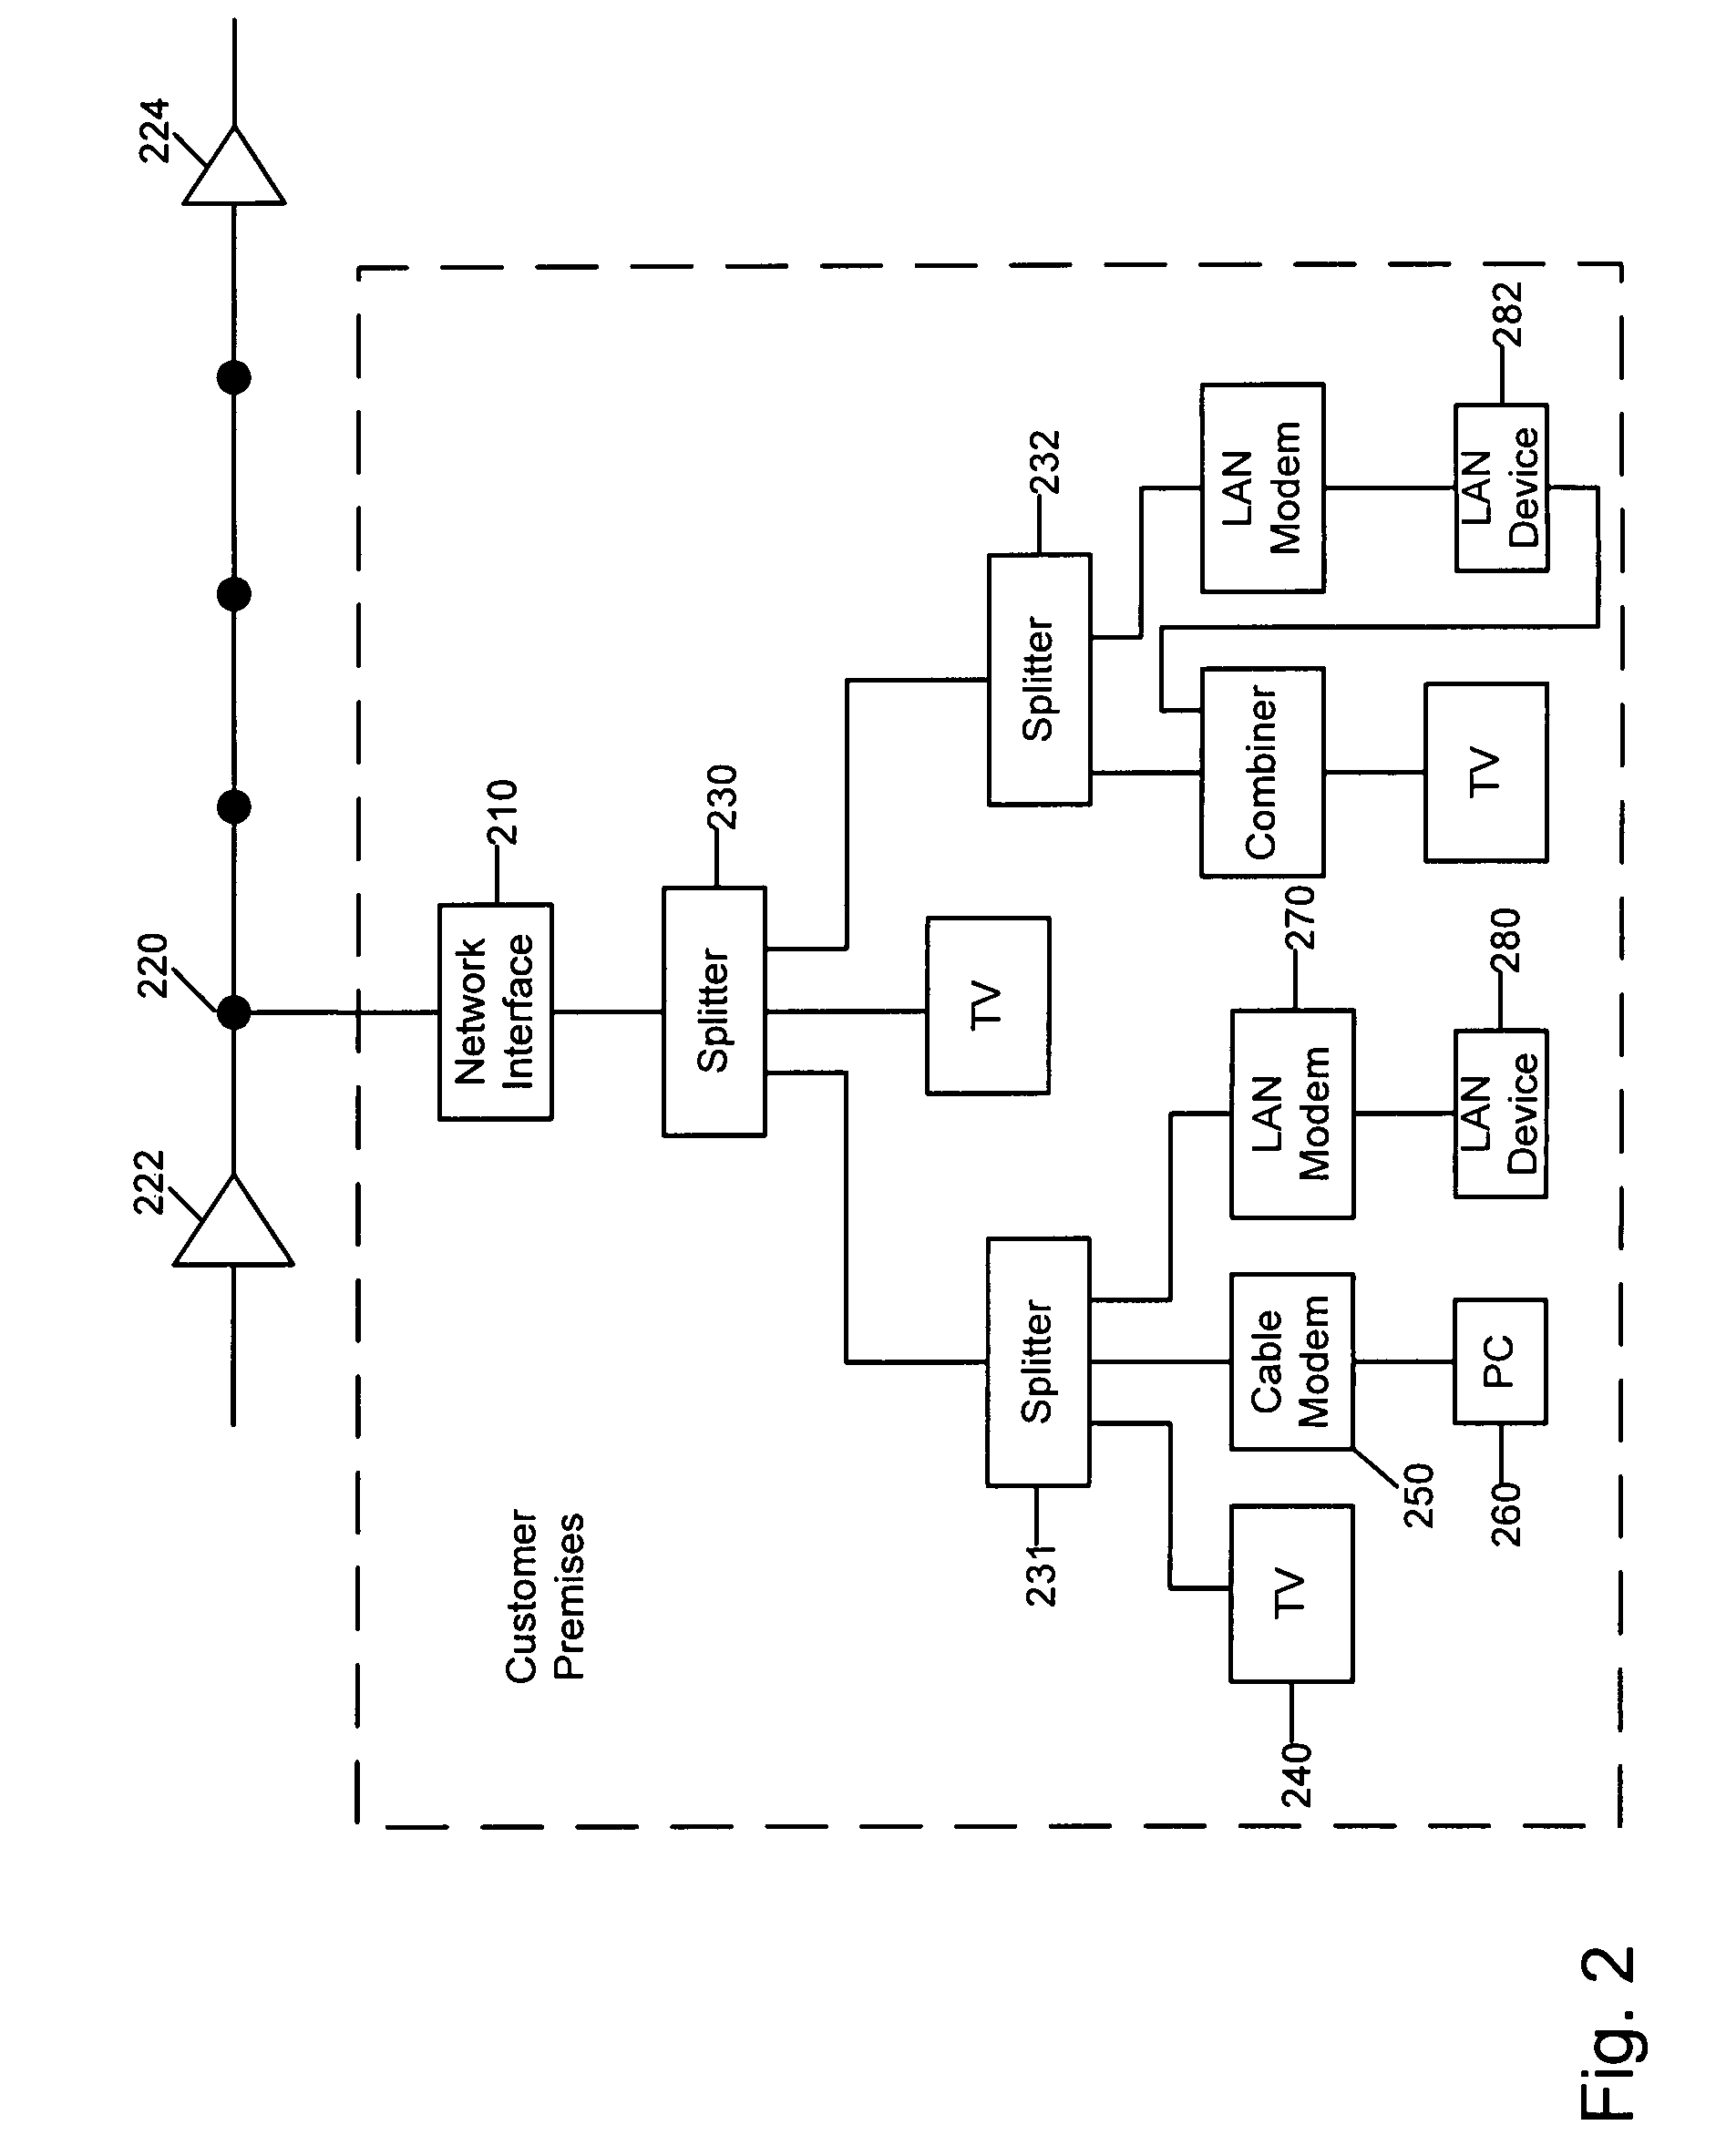 Broadband network for coaxial cable using multi-carrier modulation